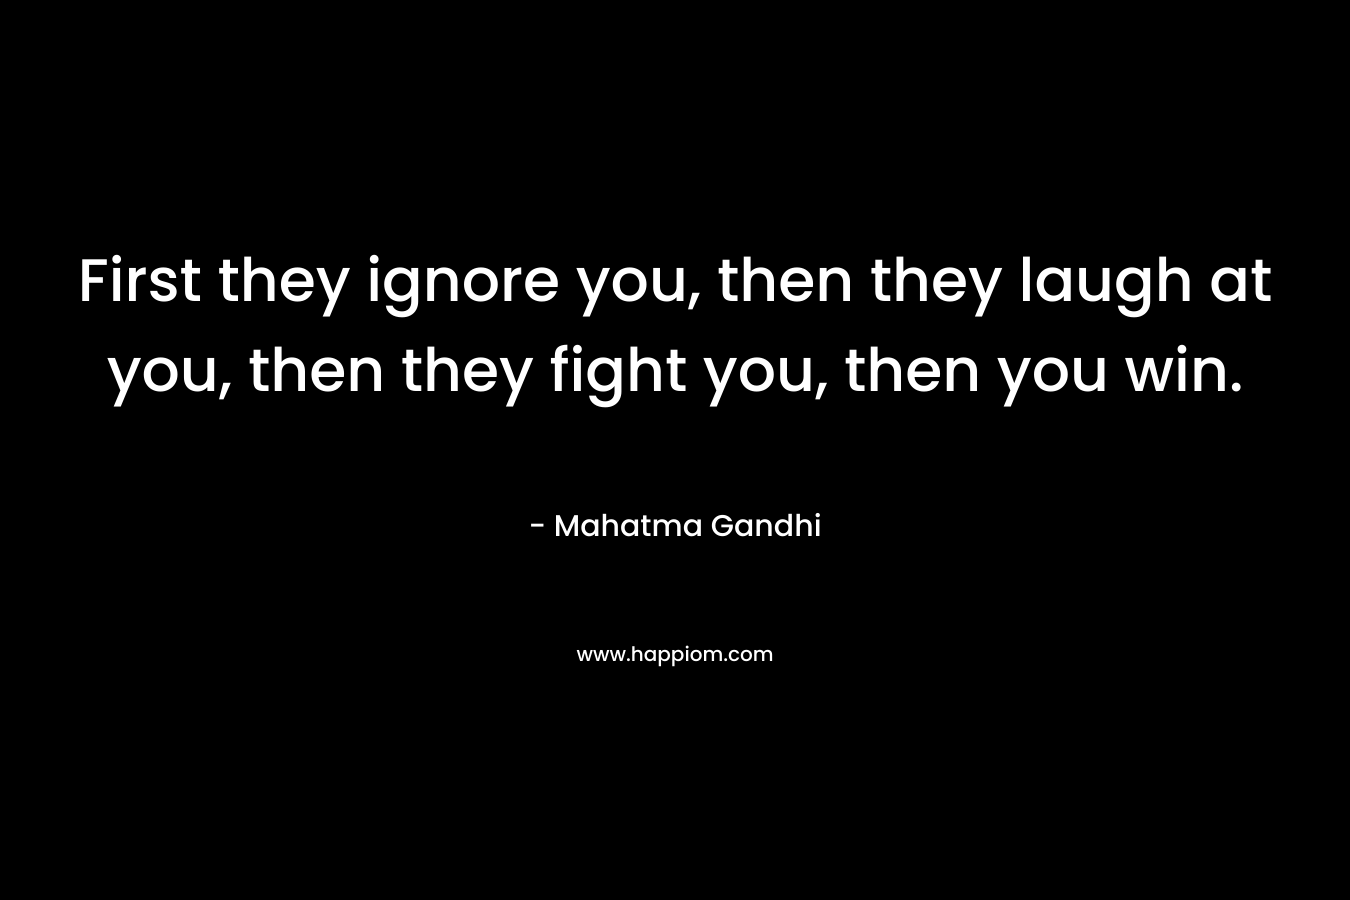 First they ignore you, then they laugh at you, then they fight you, then you win.